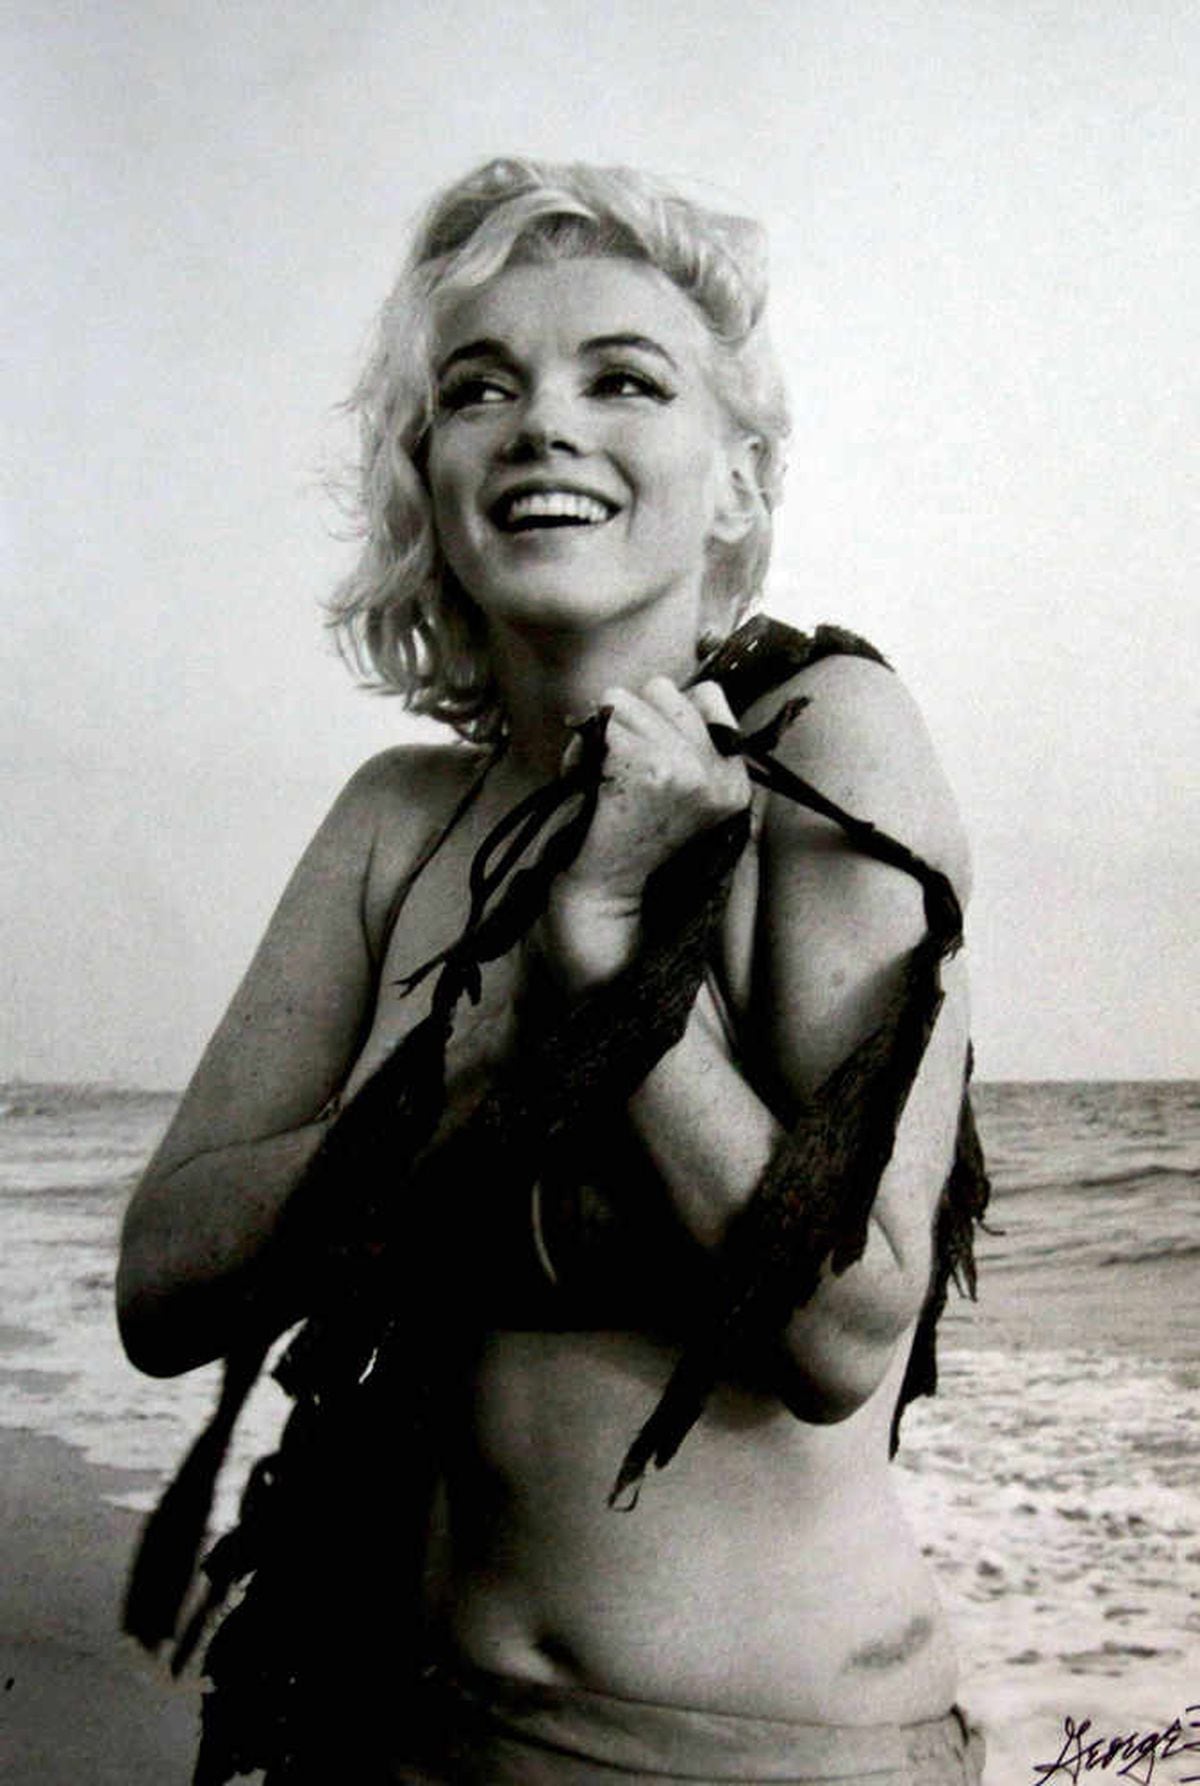 Rare Marilyn Monroe Photos Could Fetch £80000 At Shropshire Auction